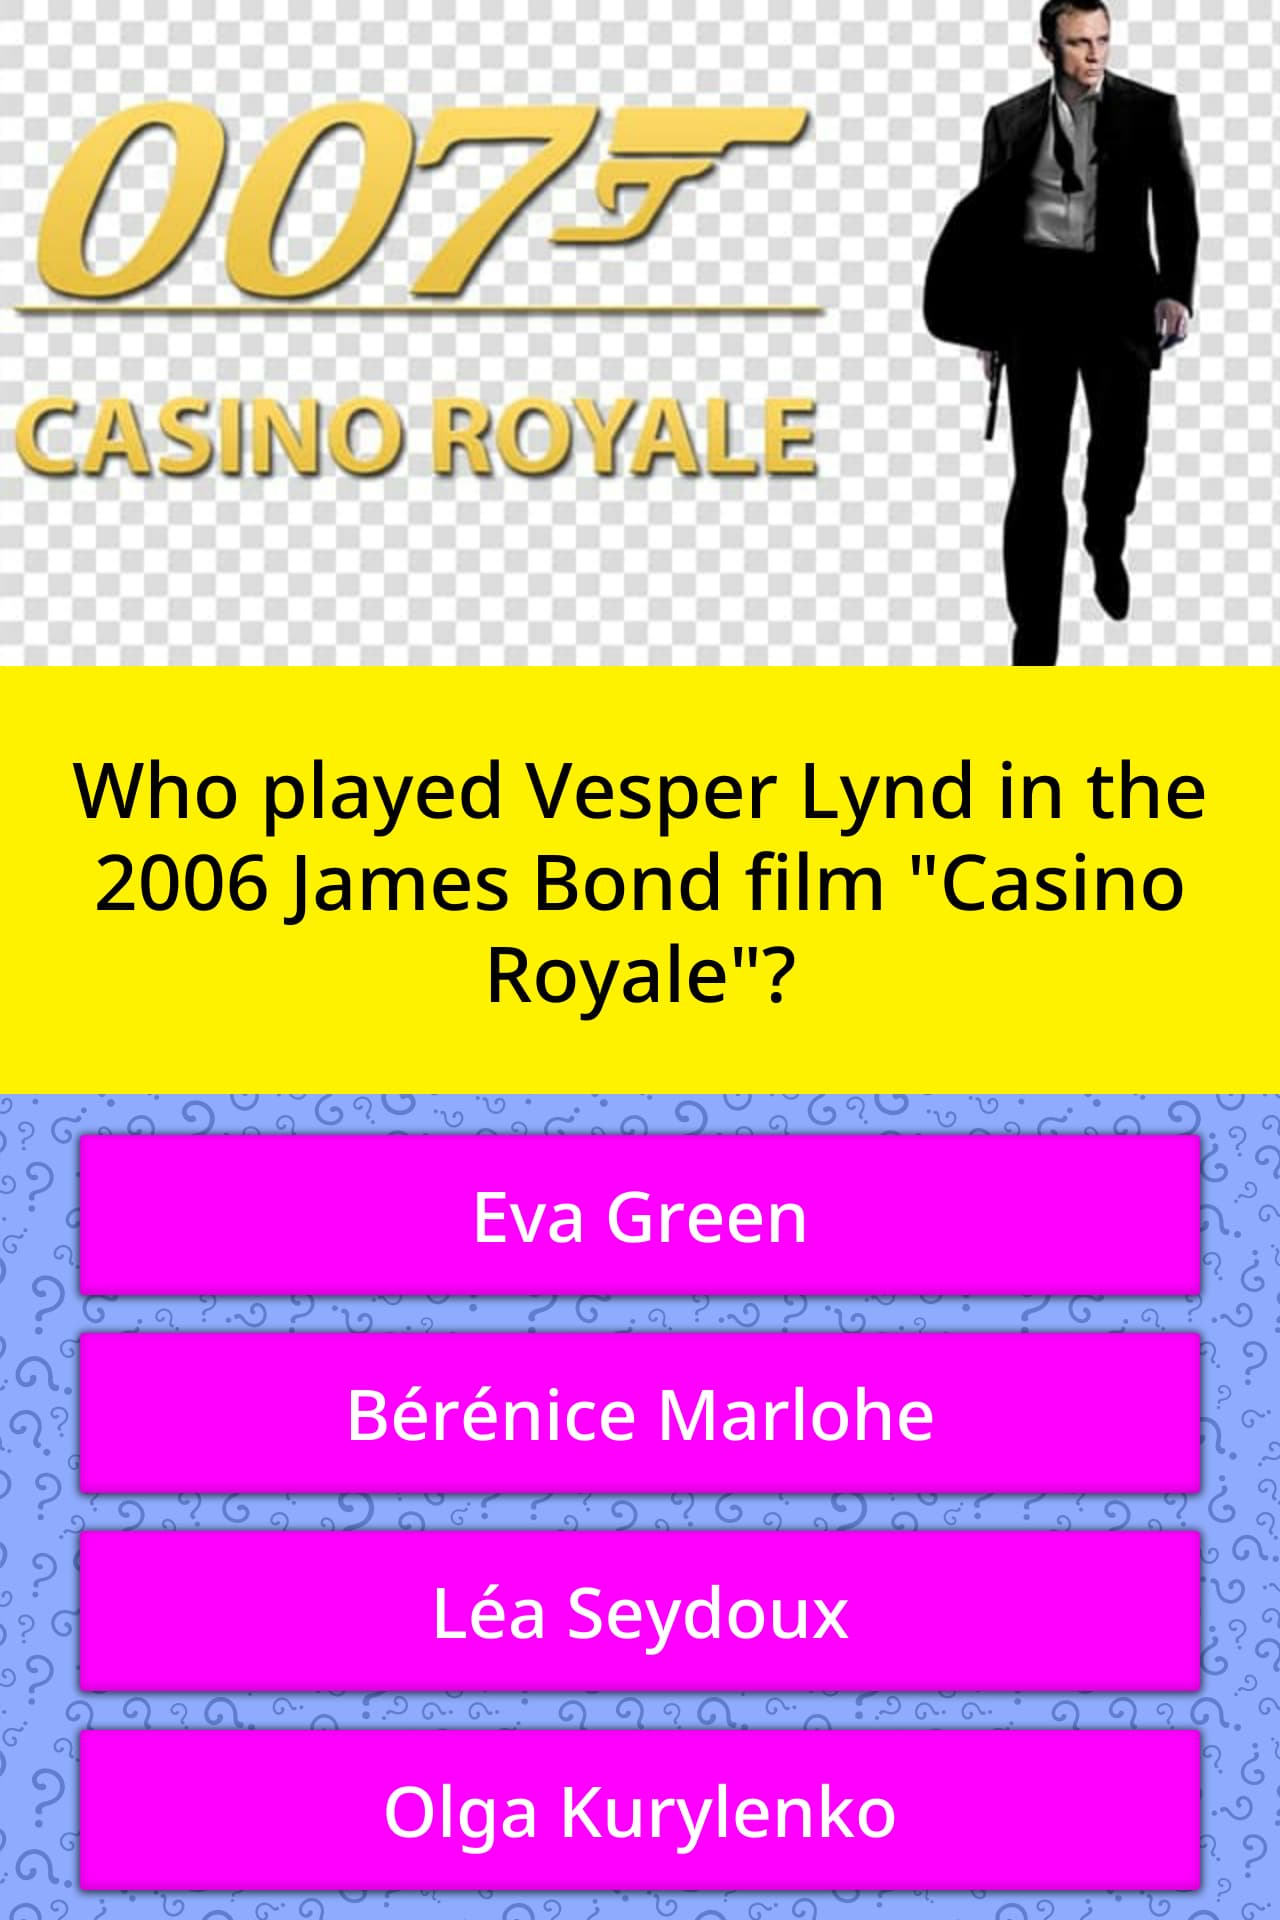 who played vesper lynd in casino royale